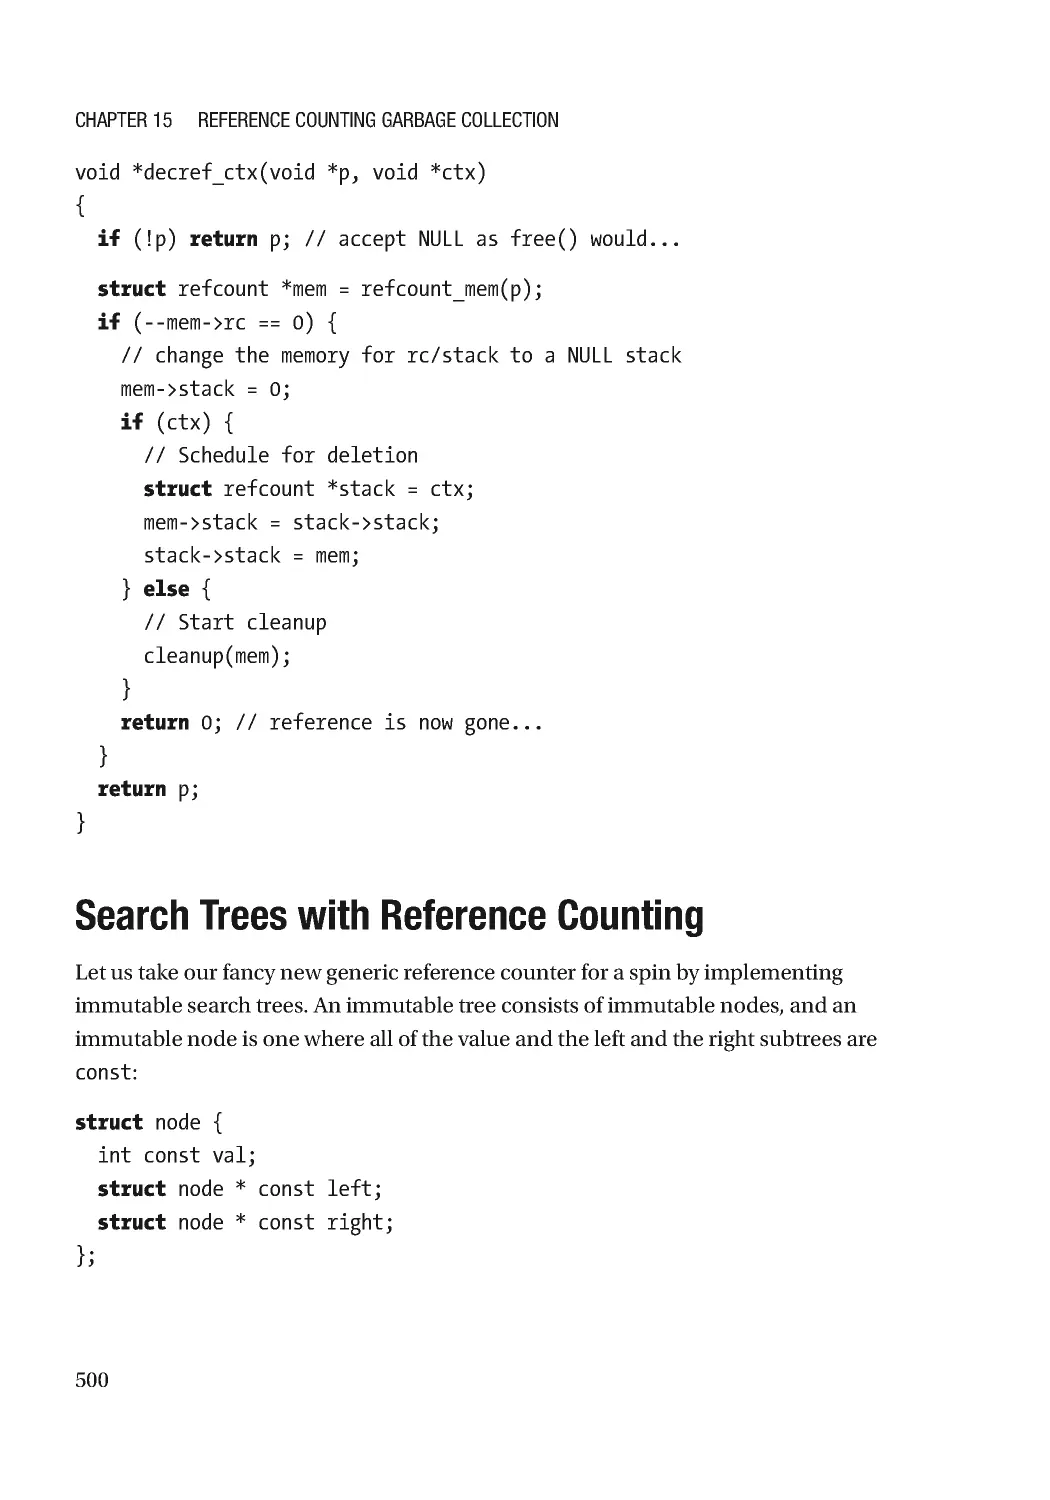 Search Trees with Reference Counting